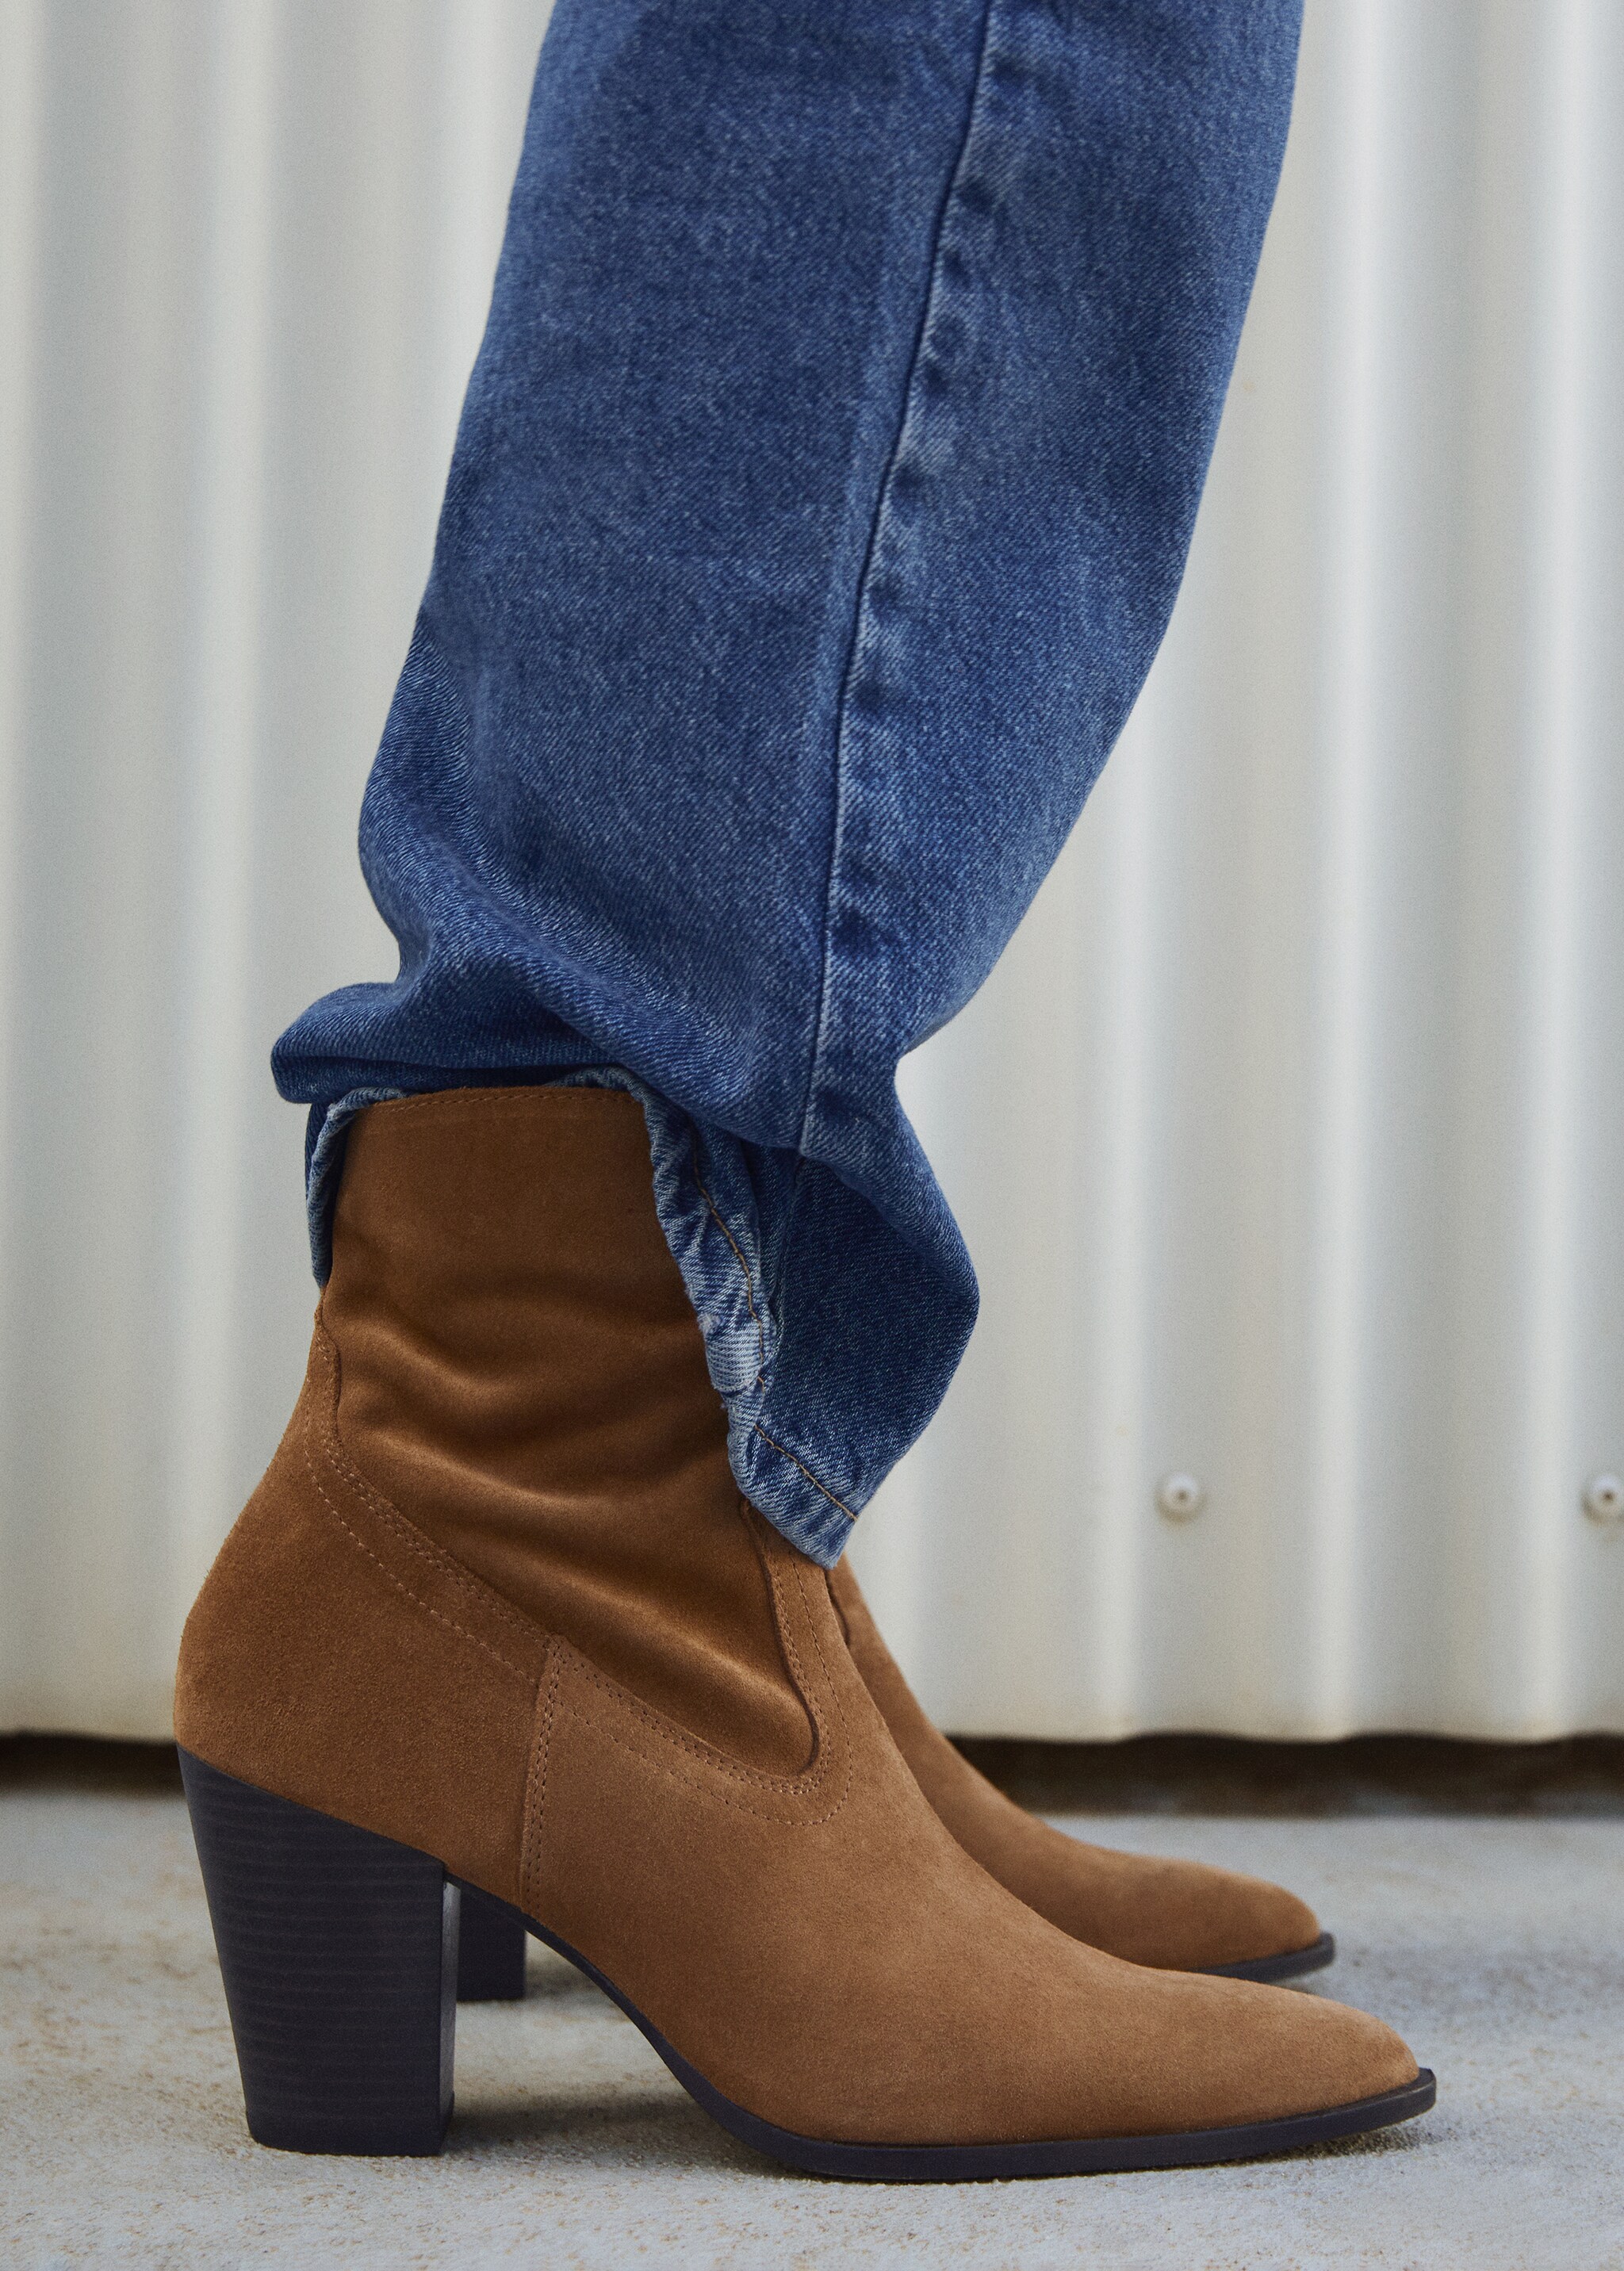 Suede leather ankle boots - General plane